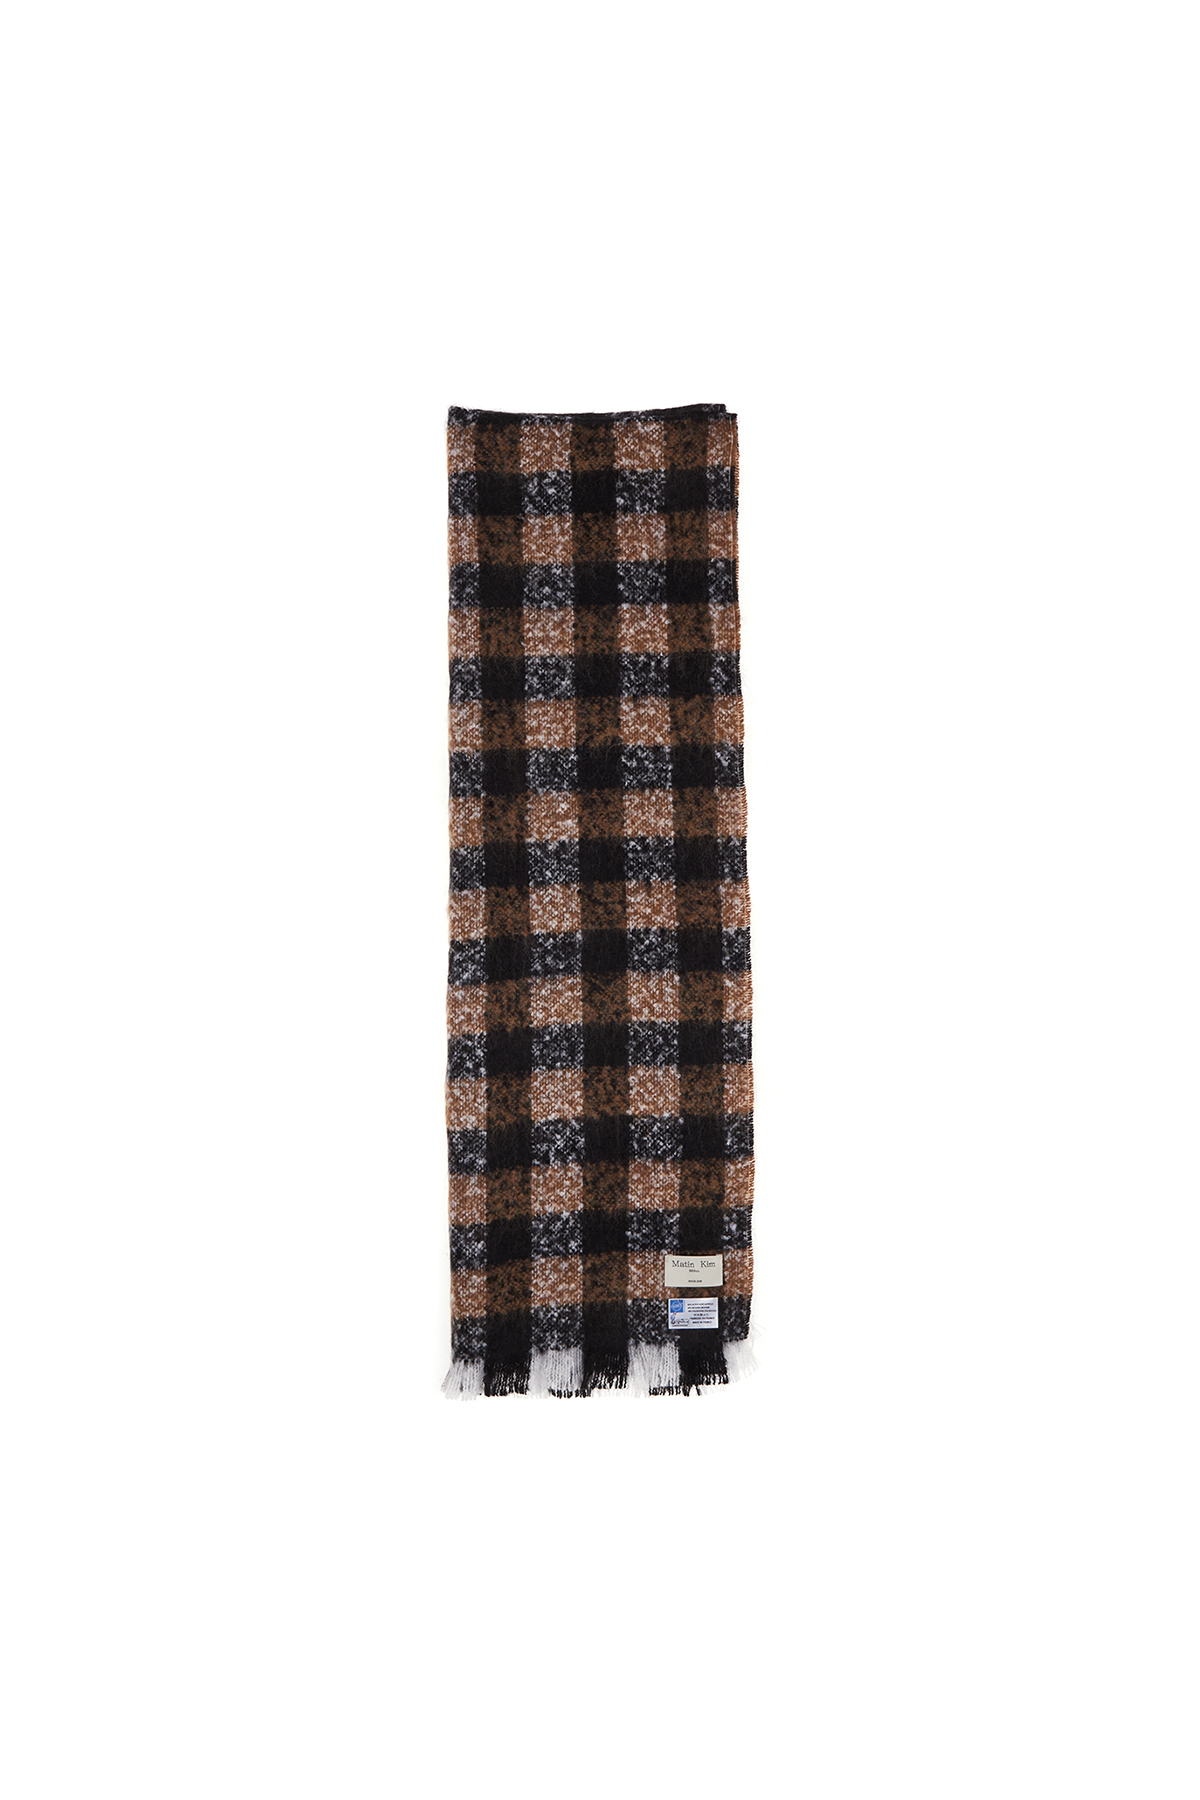 CLASSIC WOOL BLENDED CHECK MUFFLER IN BROWN